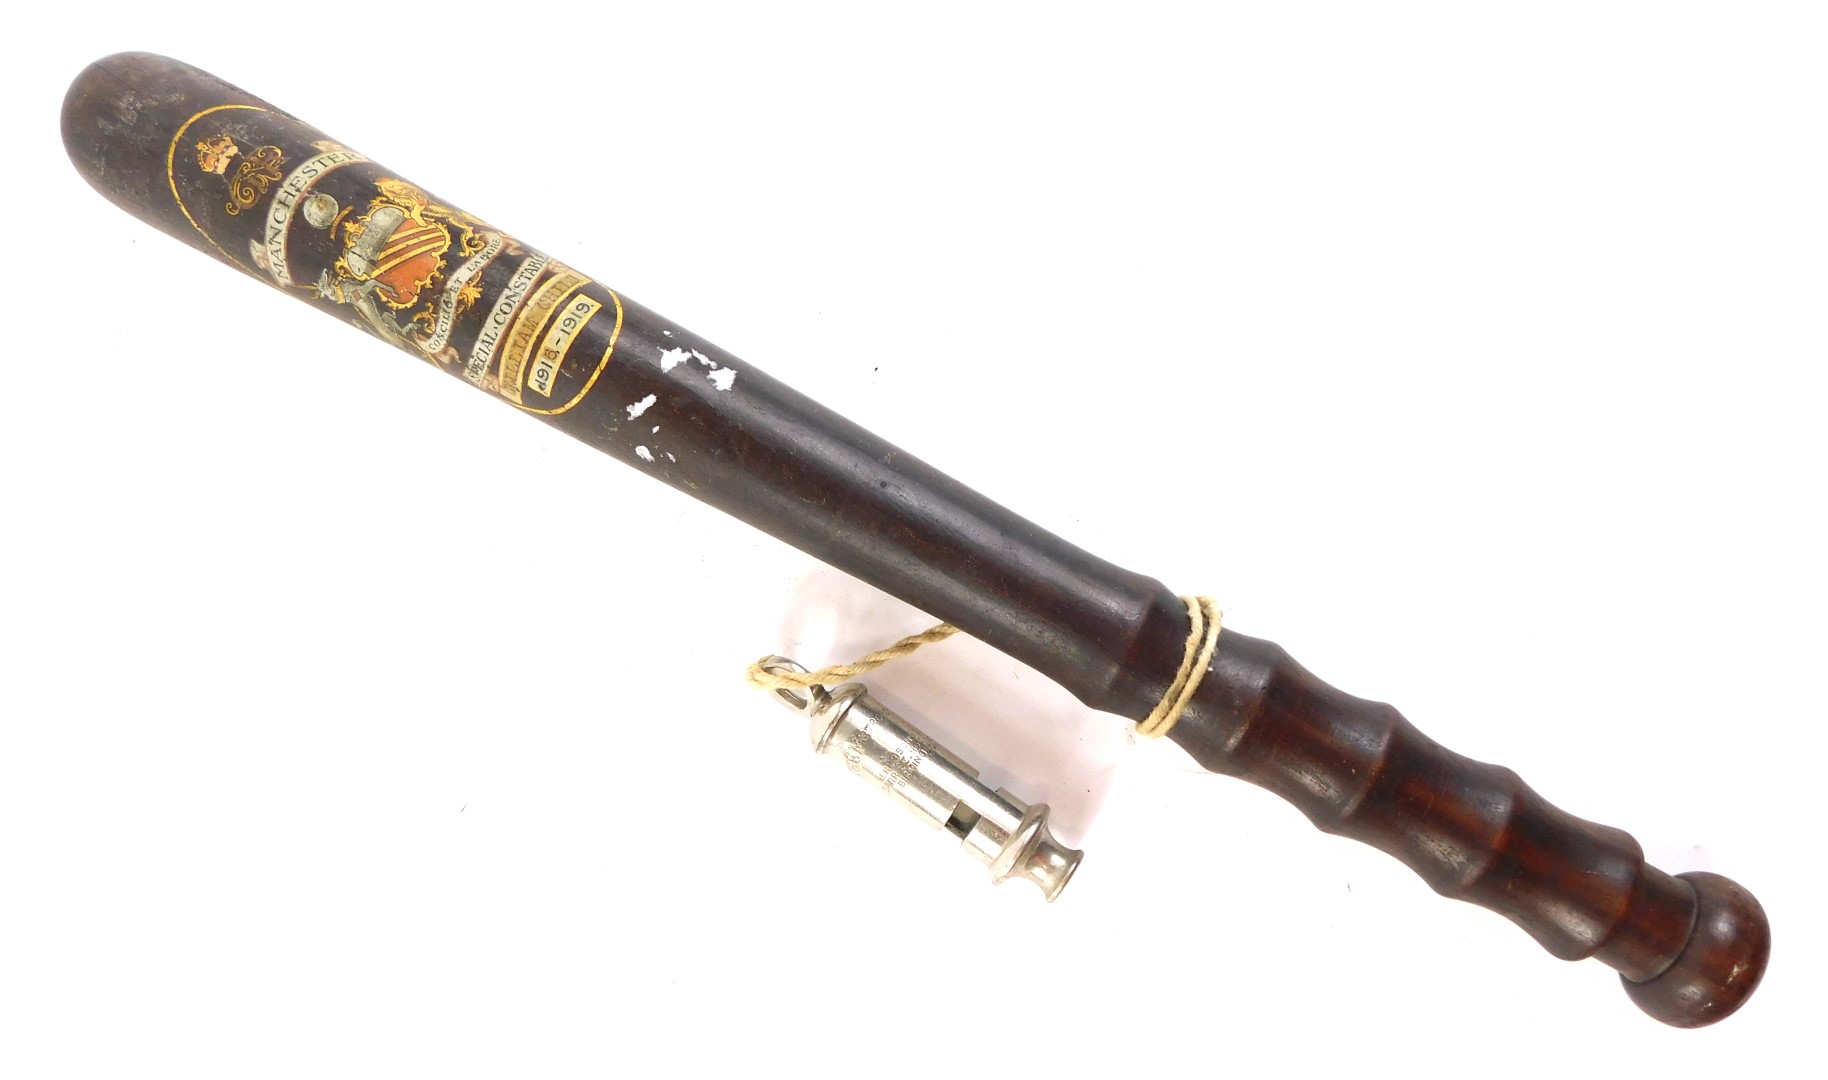 An early 20thC Manchester Special Constabulary truncheon, awarded to a William Child dated 1916-1919